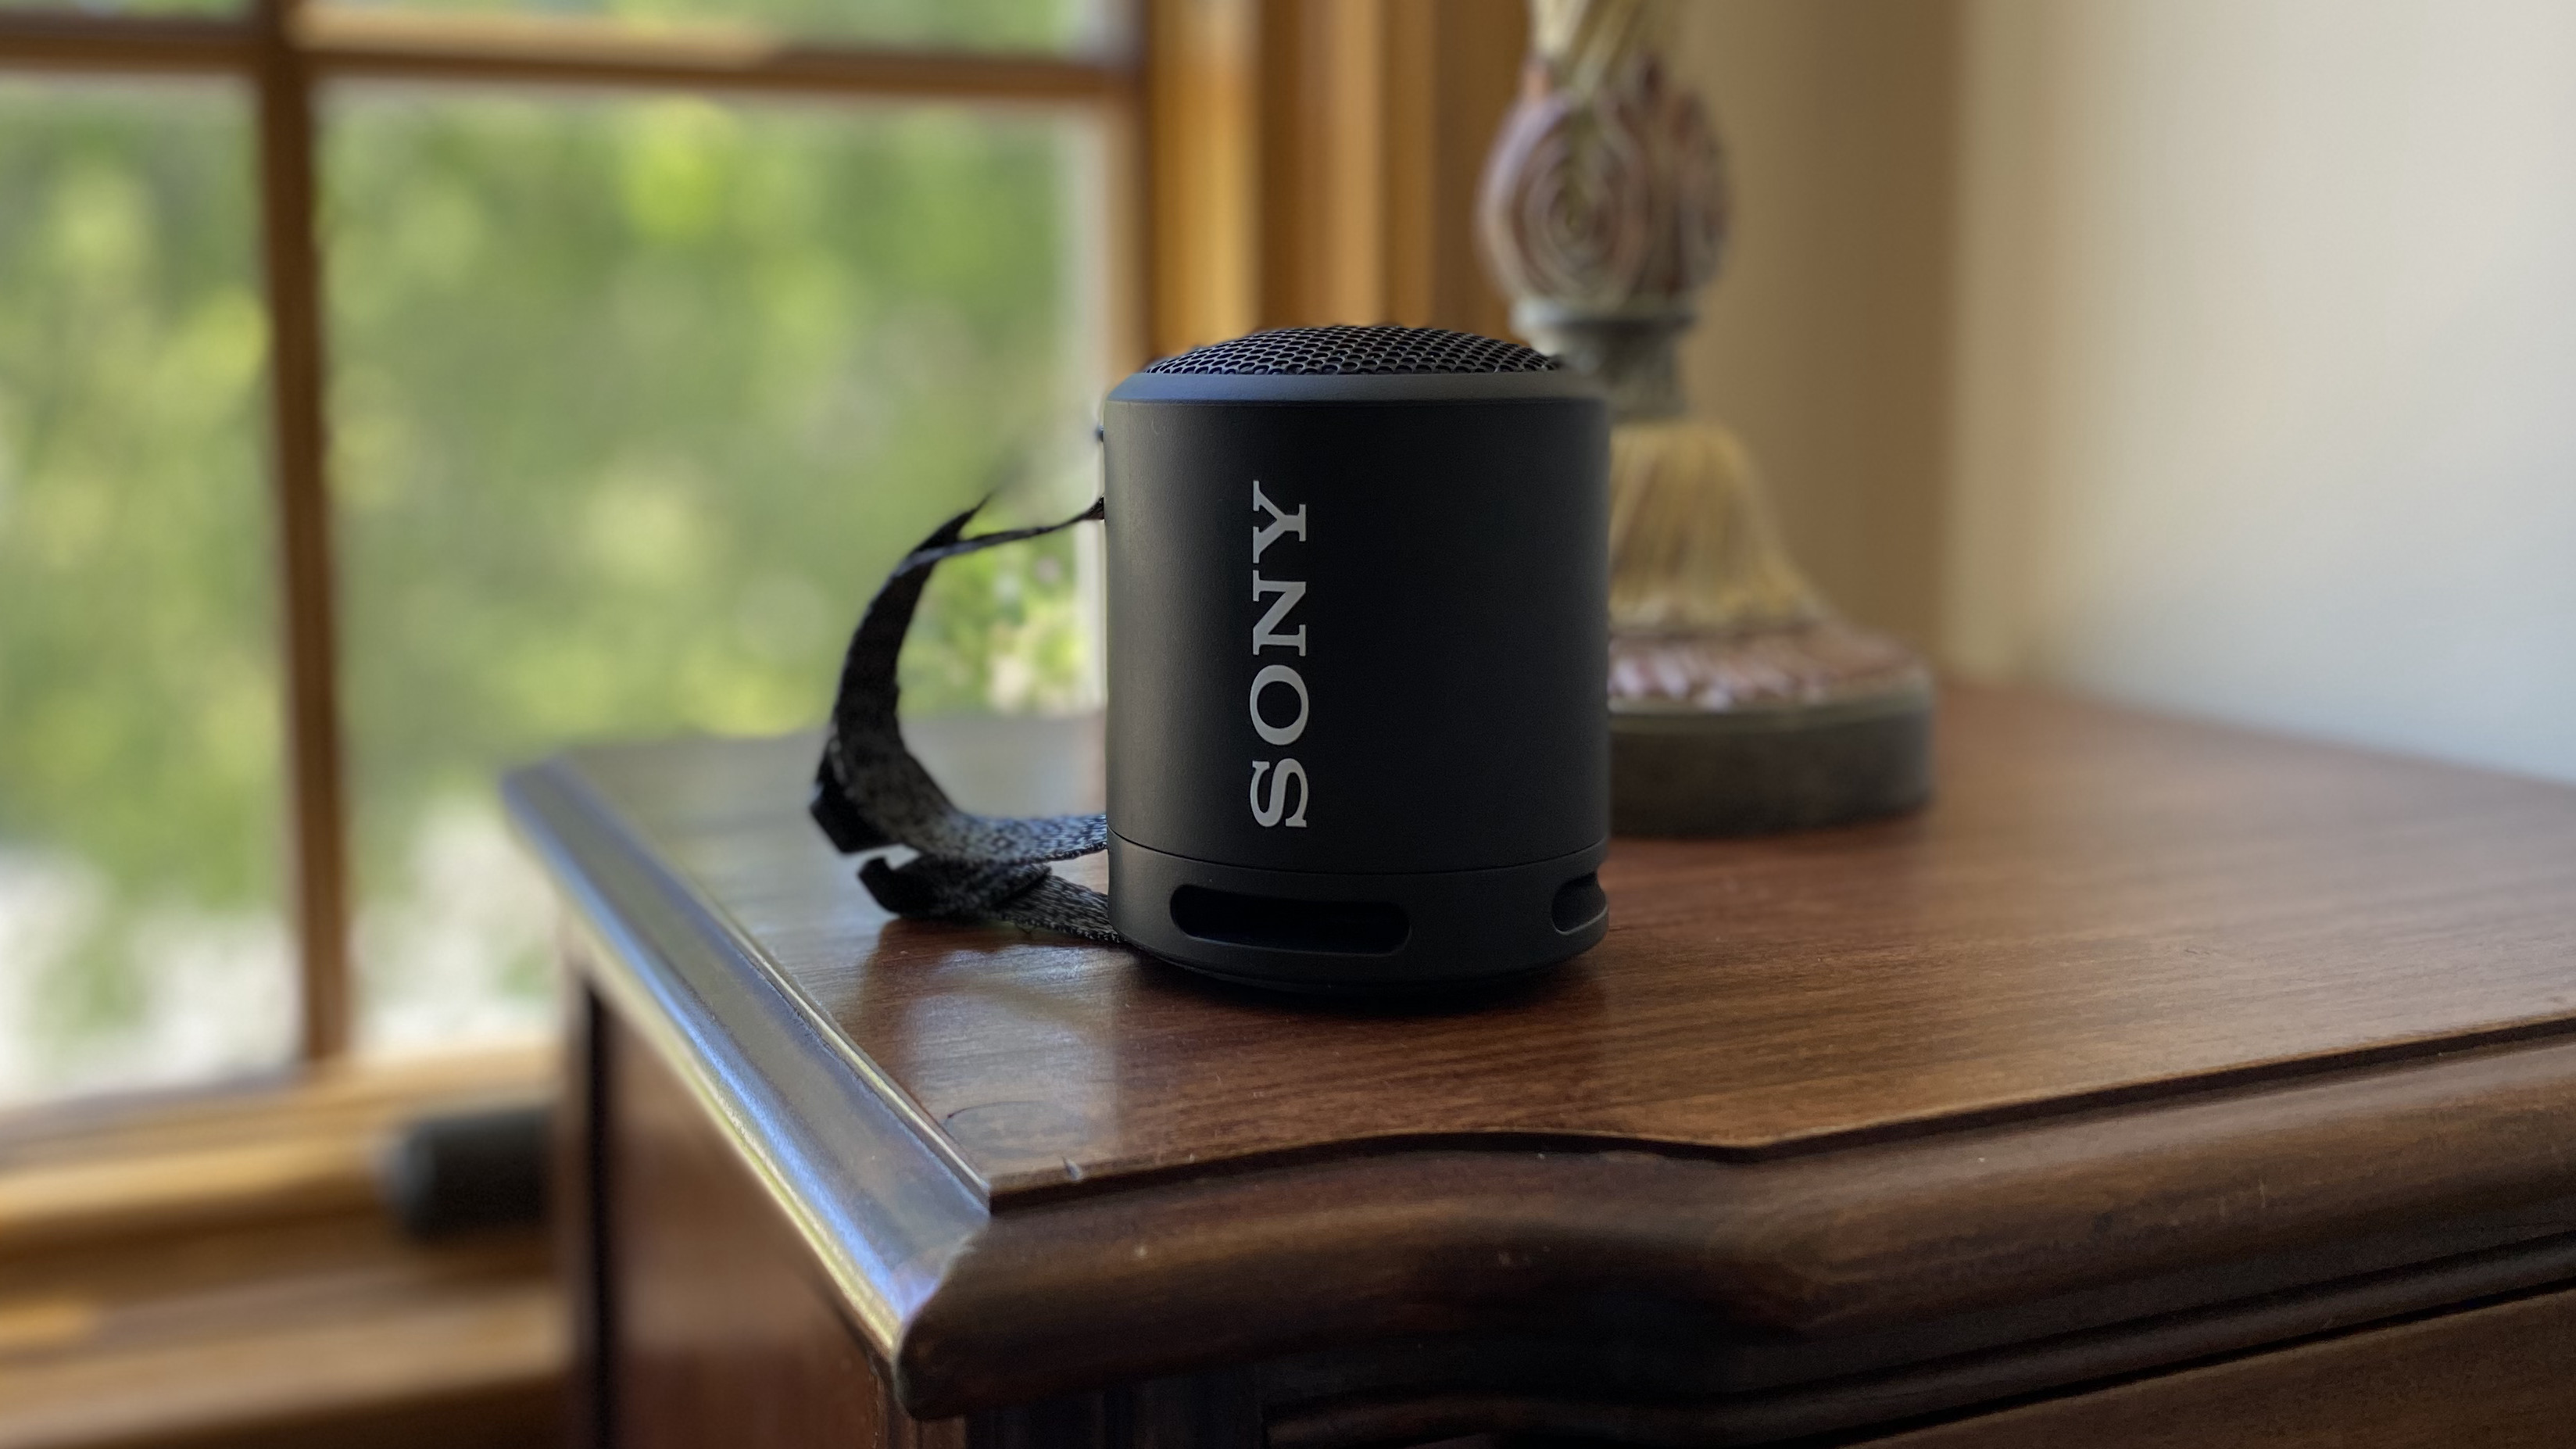 Sony SRS-XB13 review: a budget Bluetooth speaker to use outside